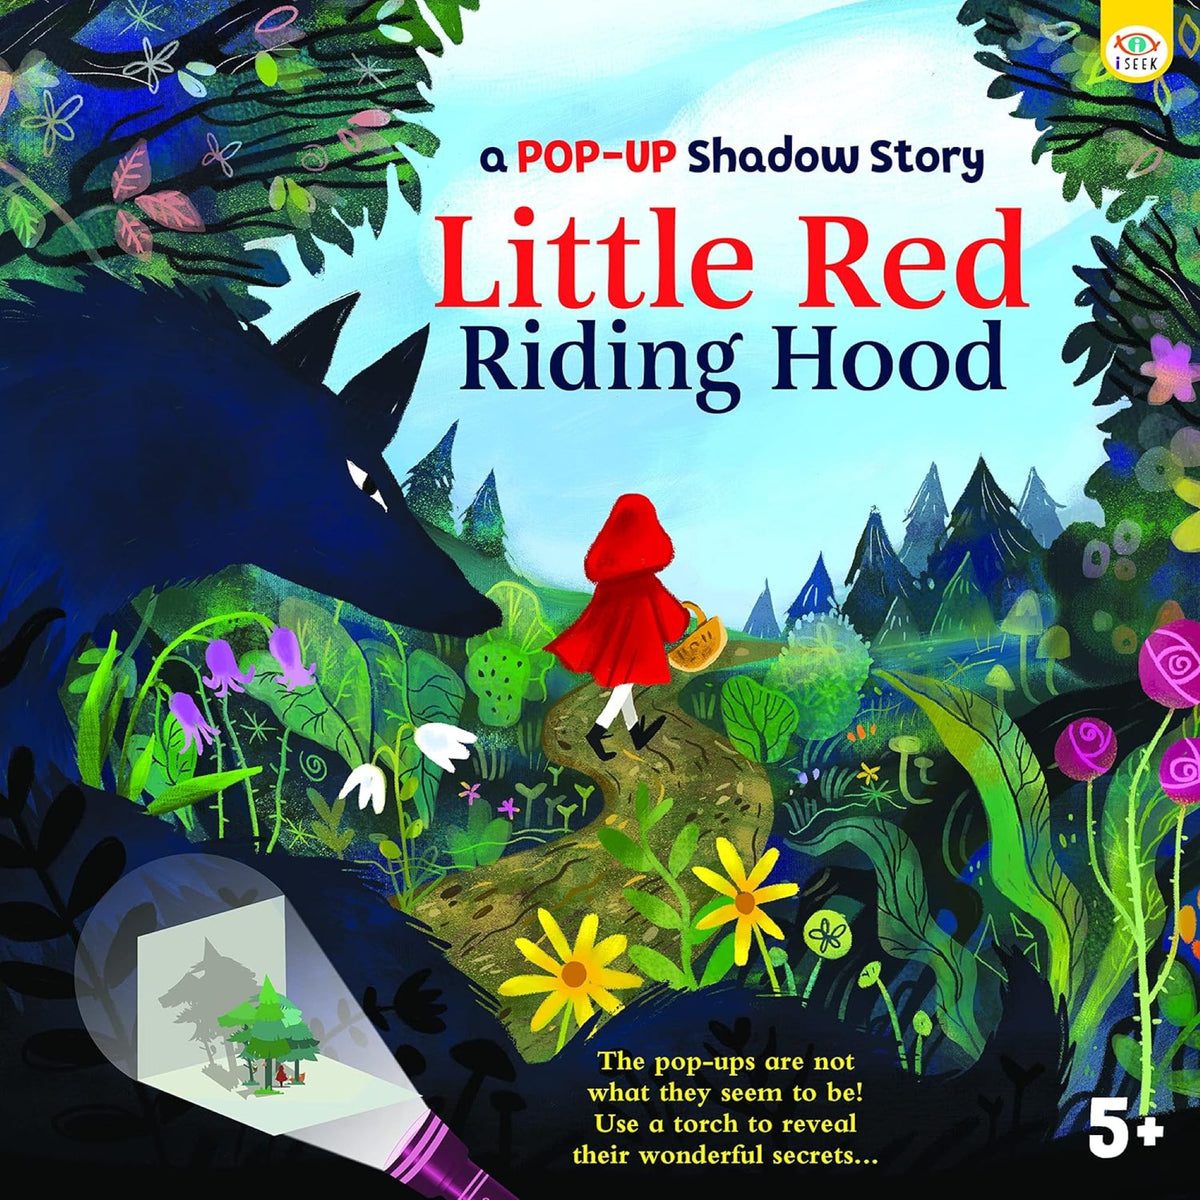 Little Red Riding Hood (A Pop-Up Shadow Story)